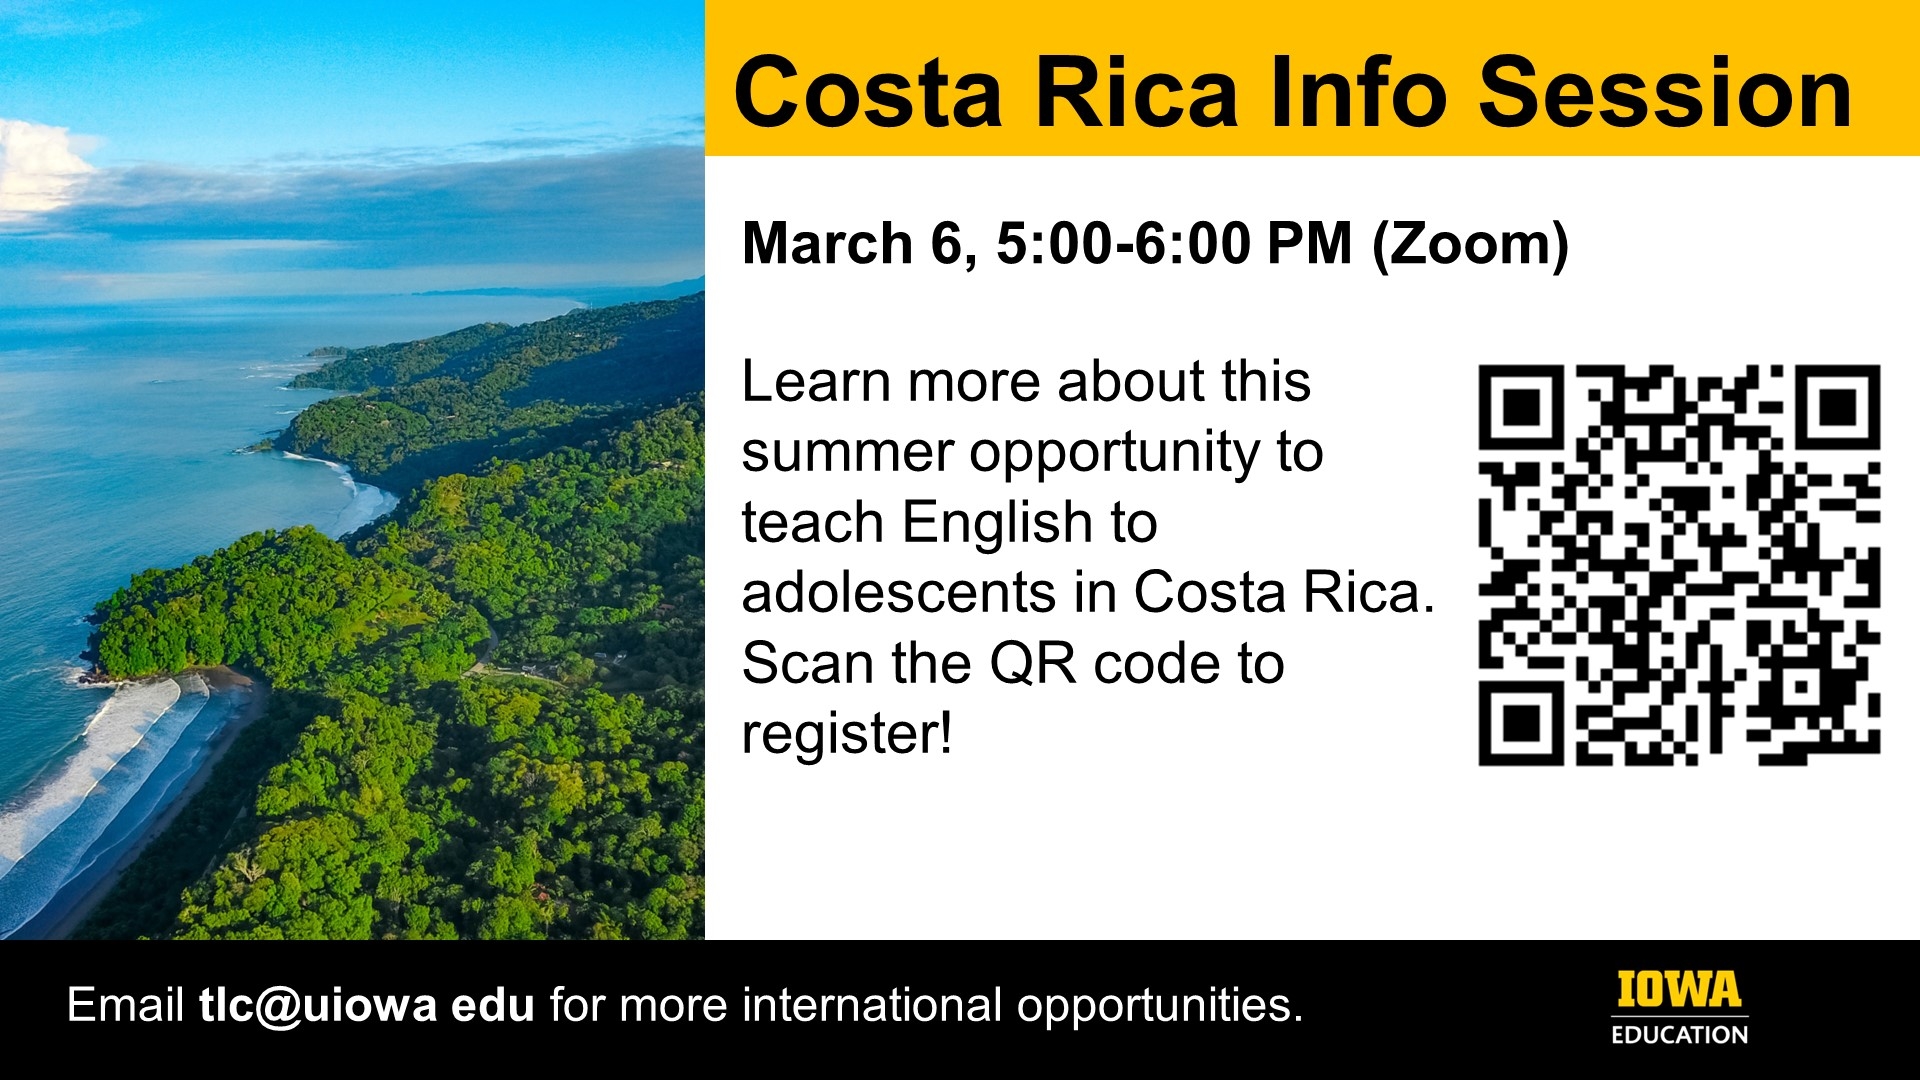 Costa Rica Info Session. 3/6, 5-6p (Zoom) Learn more about this summer opportunity to teach English to adolescents in Costa Rica.